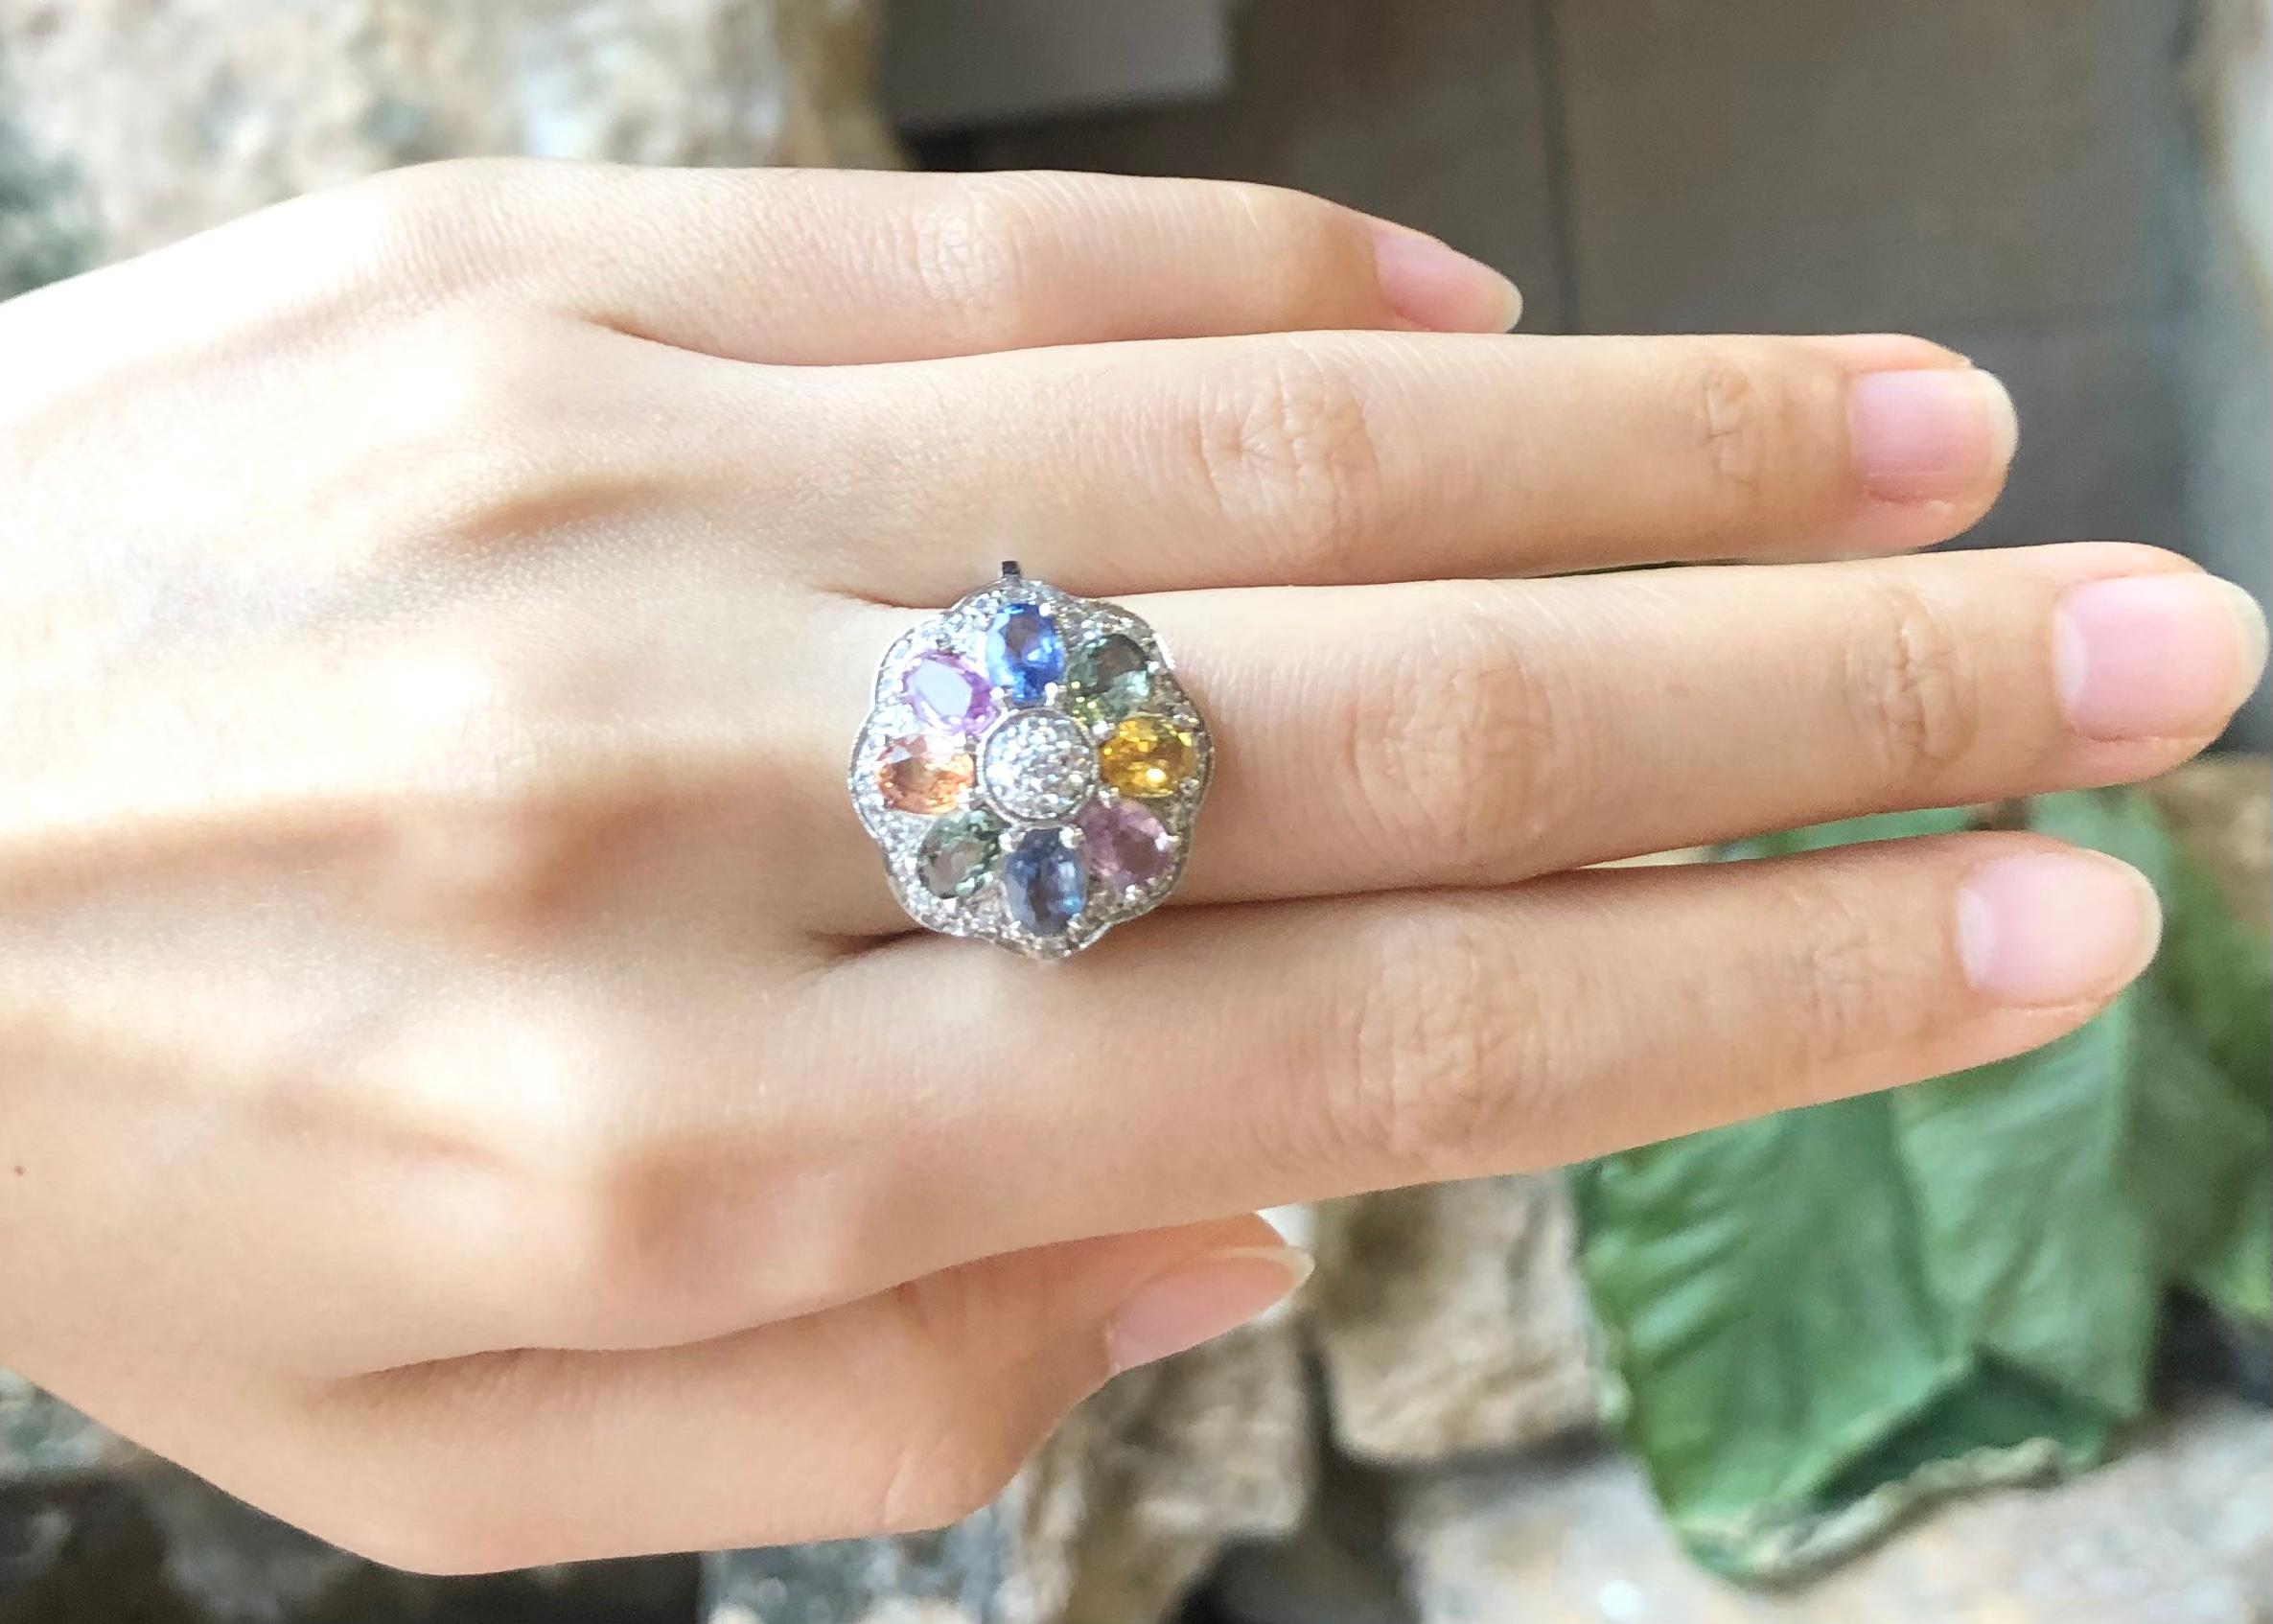 Rainbow Colour Sapphire with Cubic Zirconia Ring set in Silver Settings

Width:  2.0 cm 
Length: 2.0 cm
Ring Size: 54
Total Weight: 7.2 grams

*Please note that the silver setting is plated with rhodium to promote shine and help prevent oxidation. 